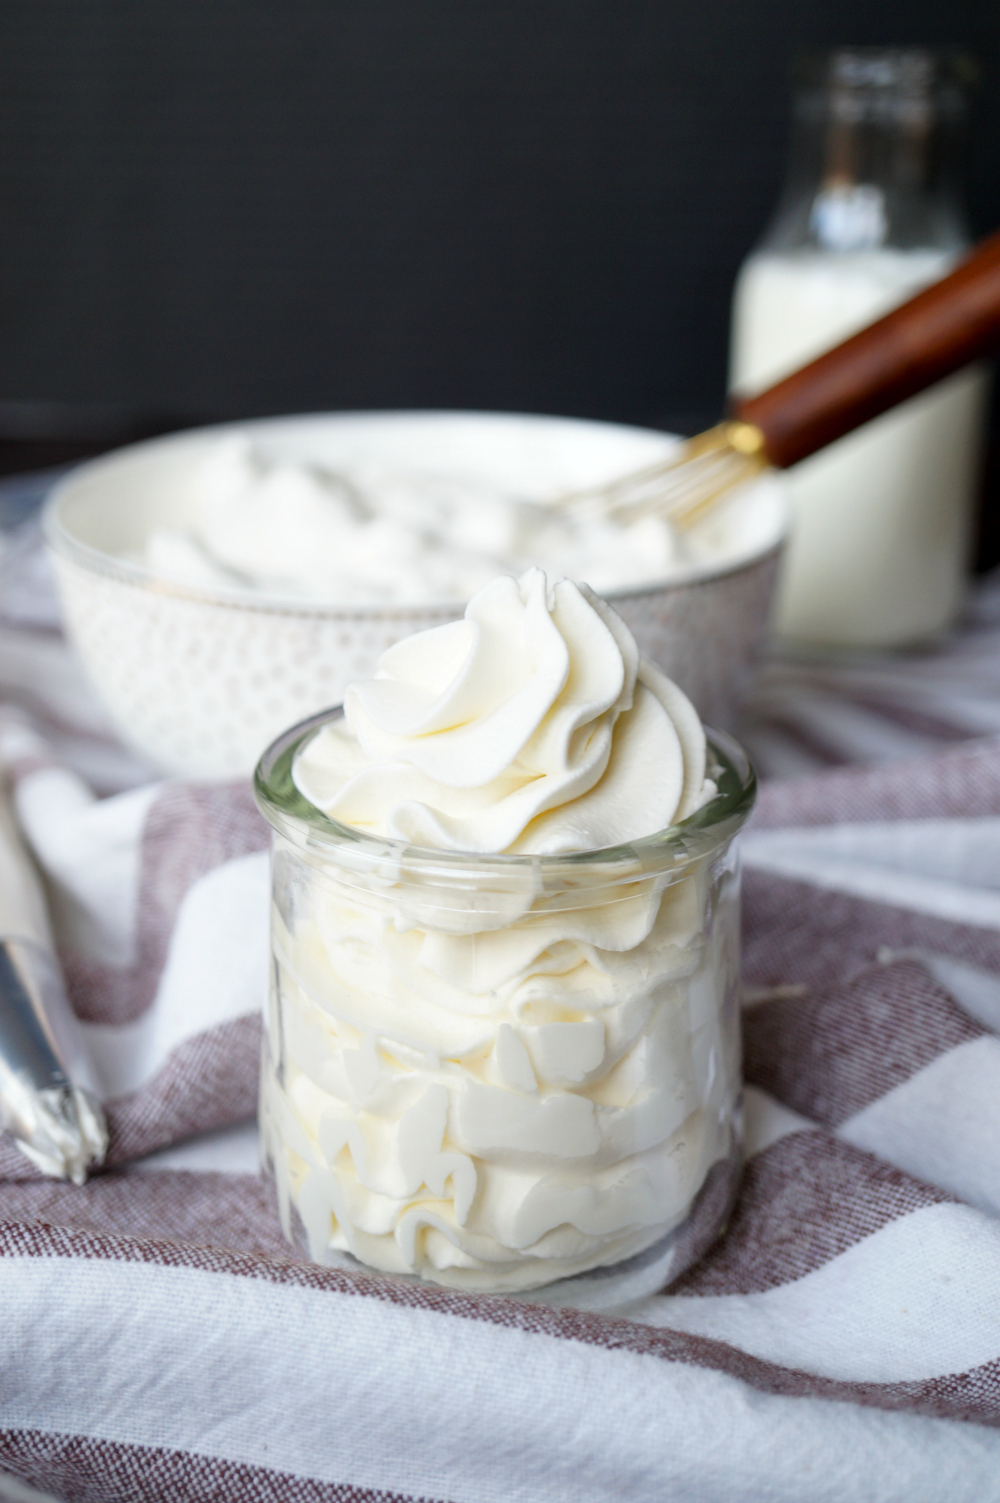 How To Make Stabilized Whipped Cream - Live Well Bake Often